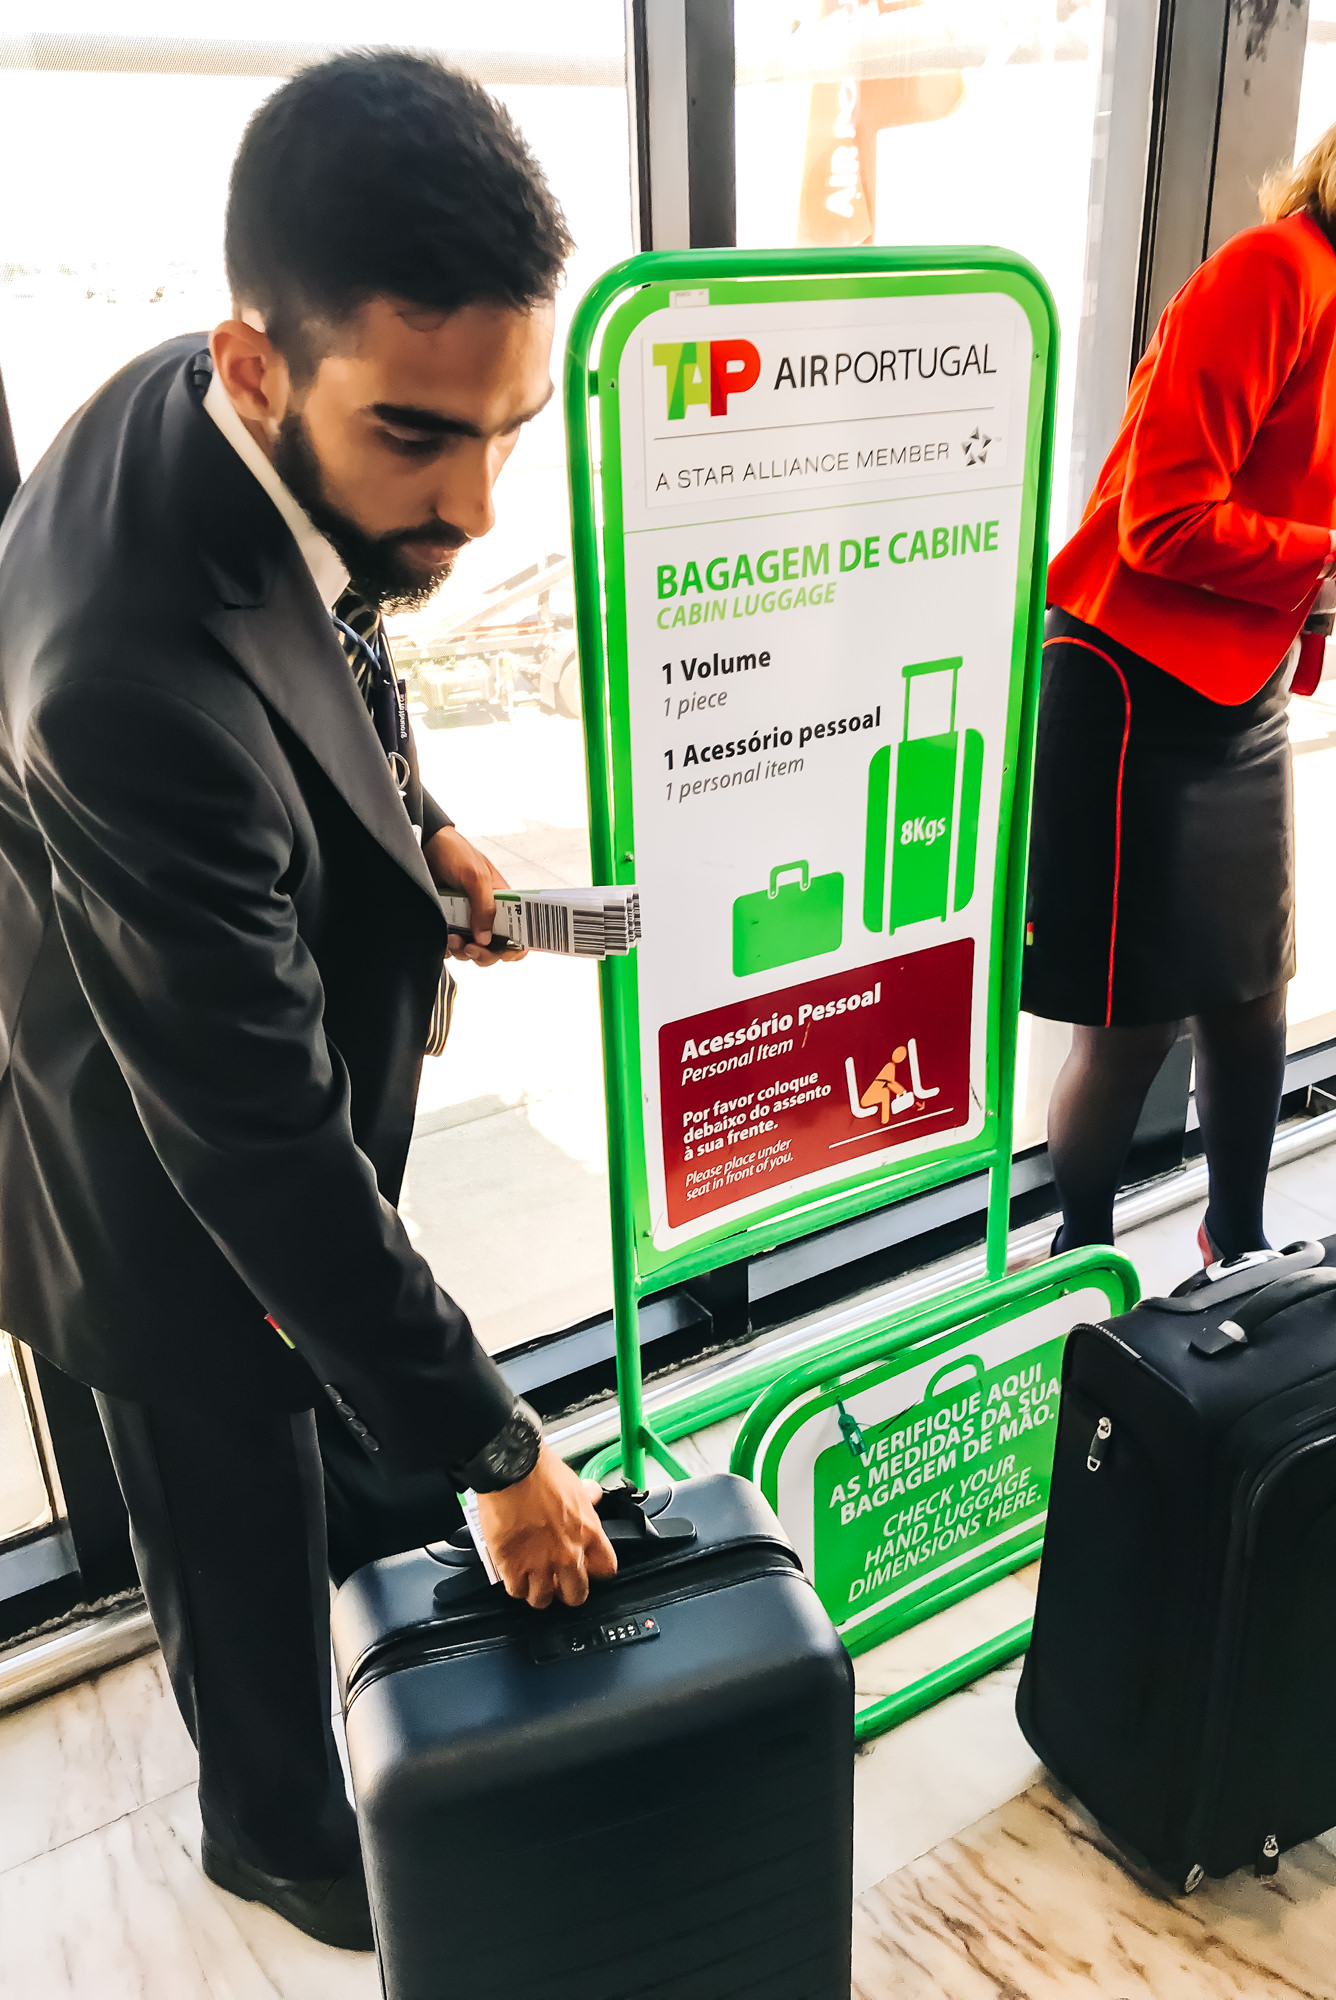 Tap Portugal Hand Luggage Britain, SAVE 35% - catchtalent.com